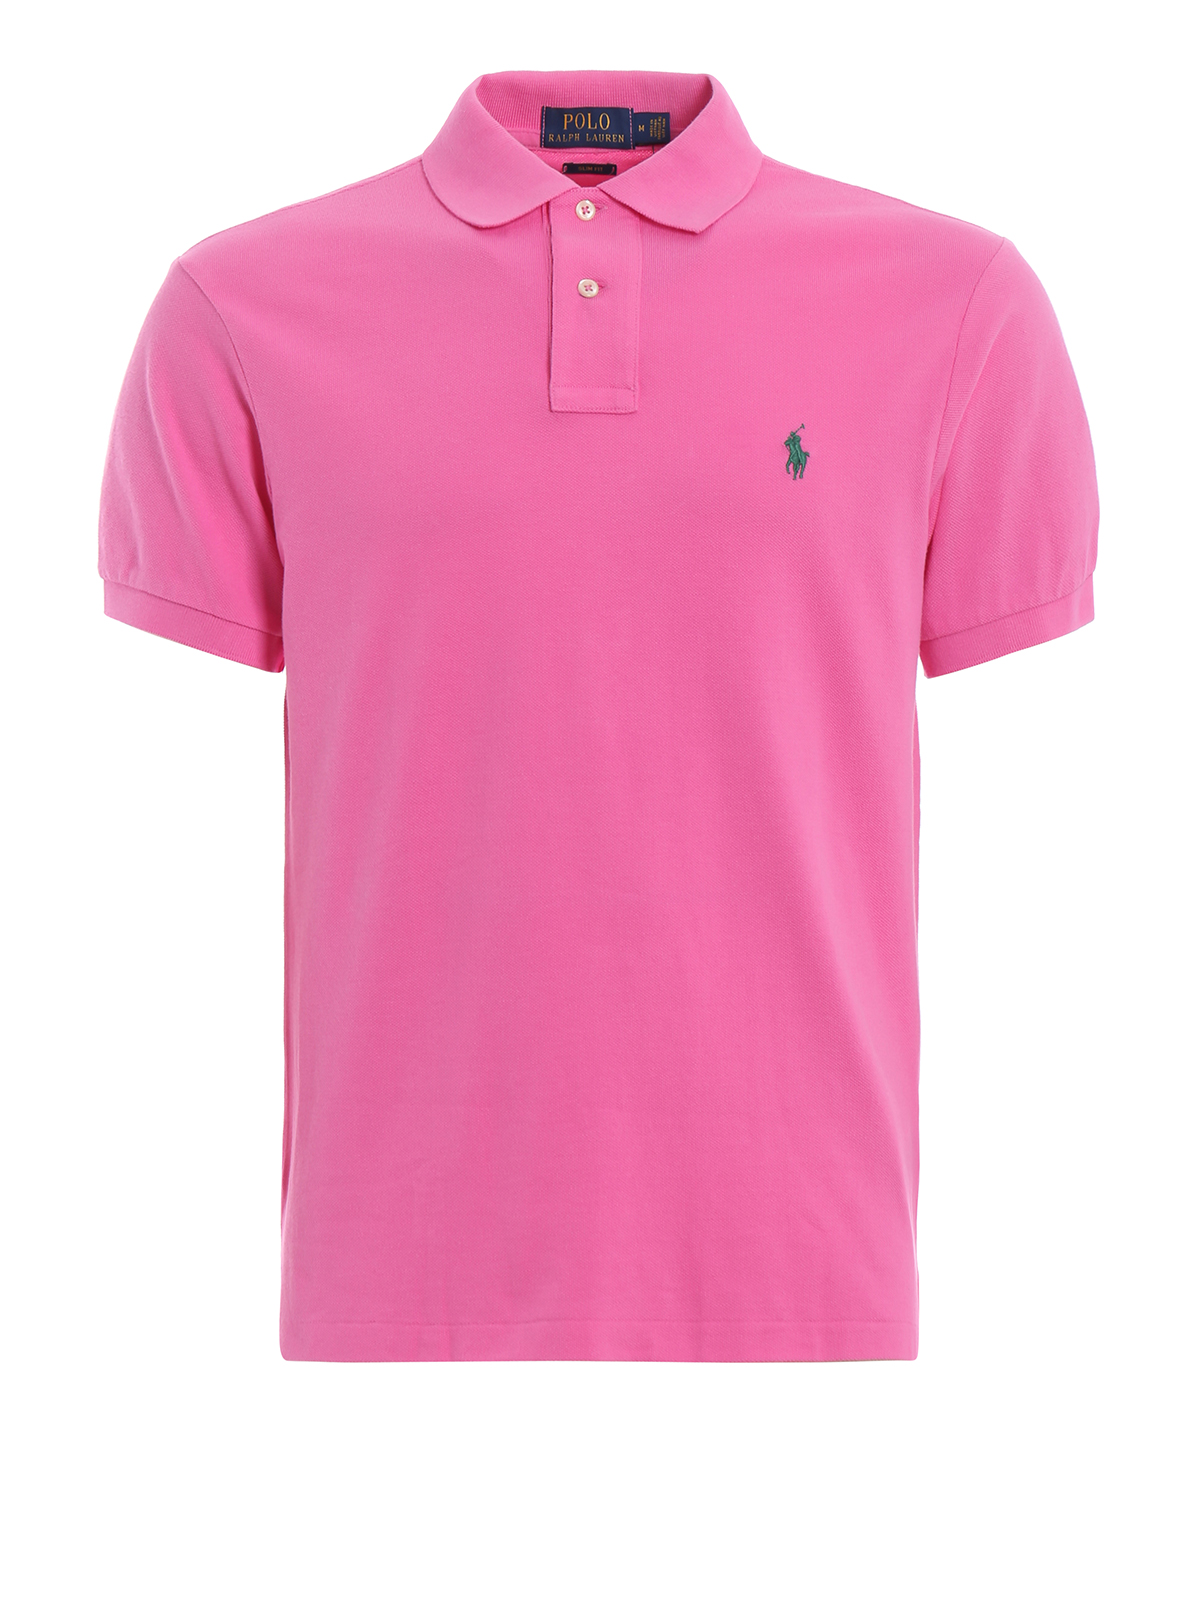 Classic pink polo shirt in pique cotton 